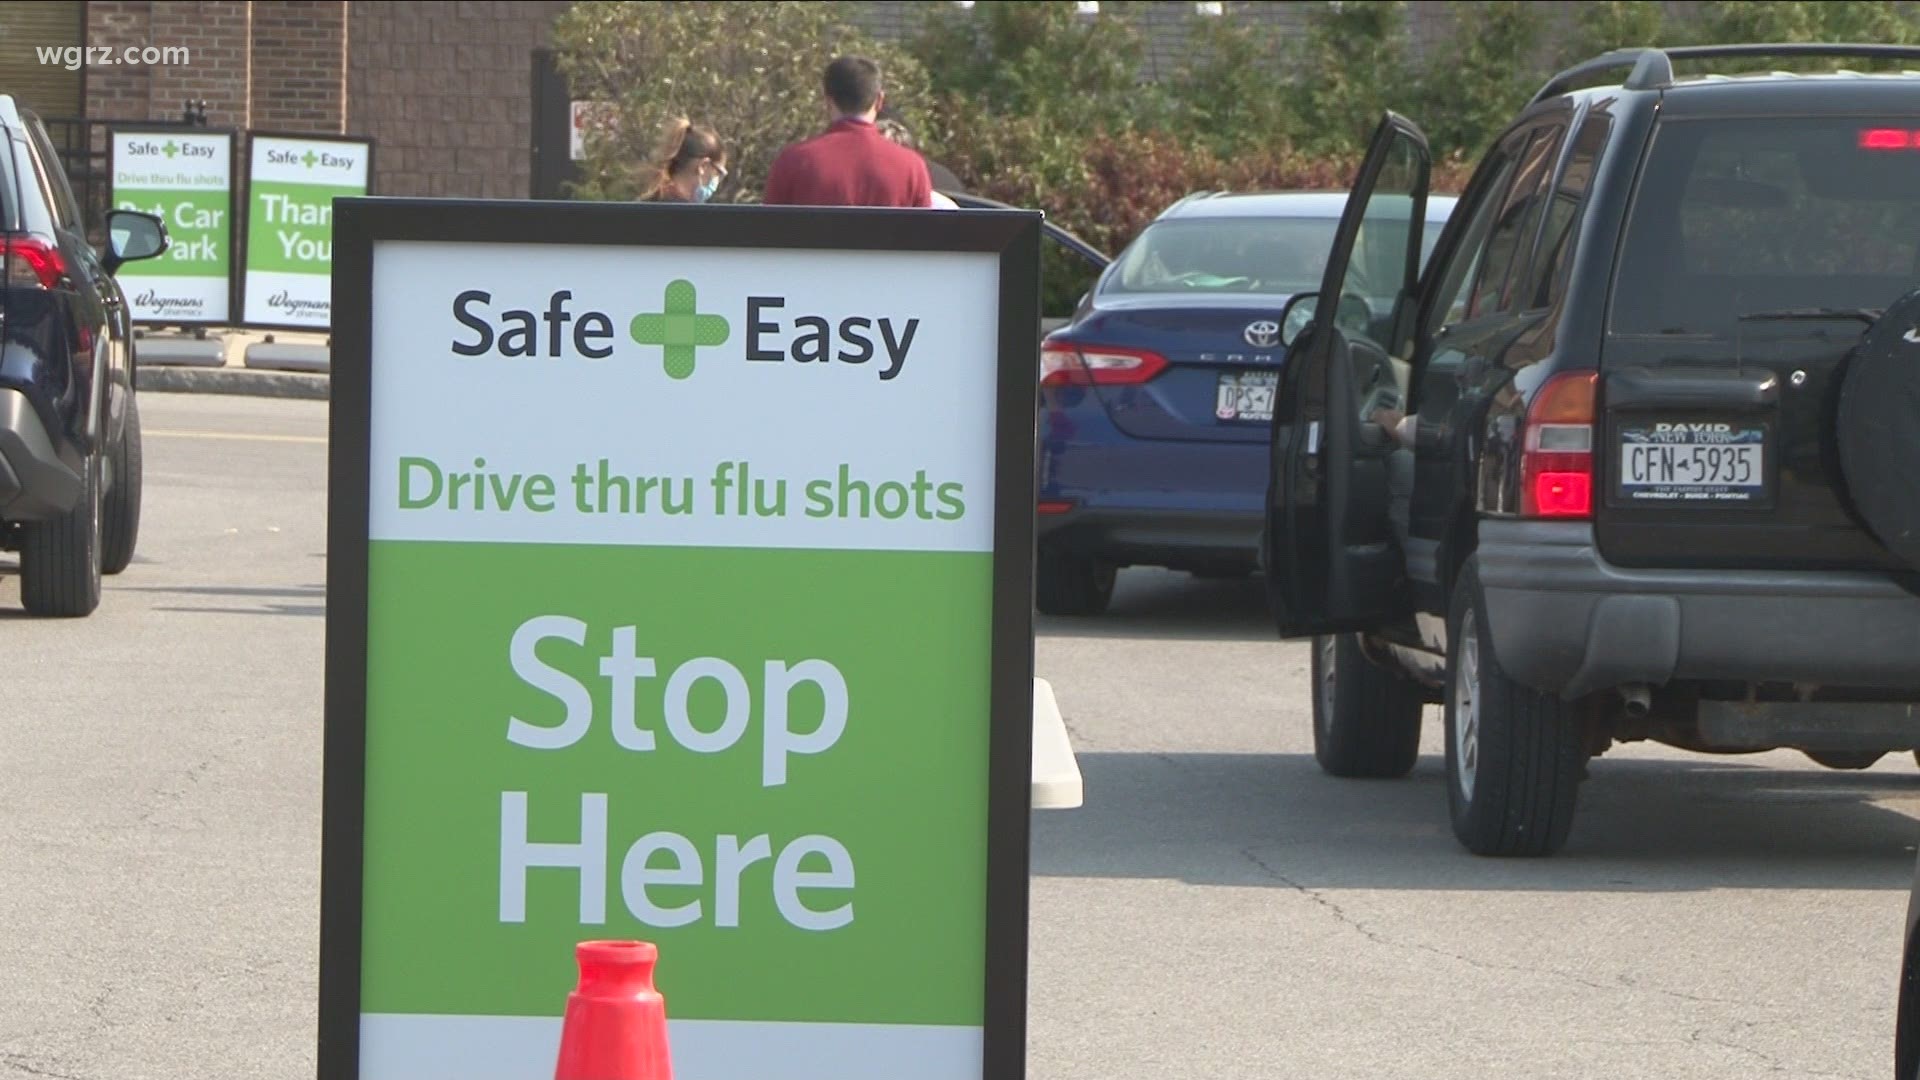 Wegmans pharmacy officials say they have seen an increase in the number of people getting vaccinated this year compared to last.